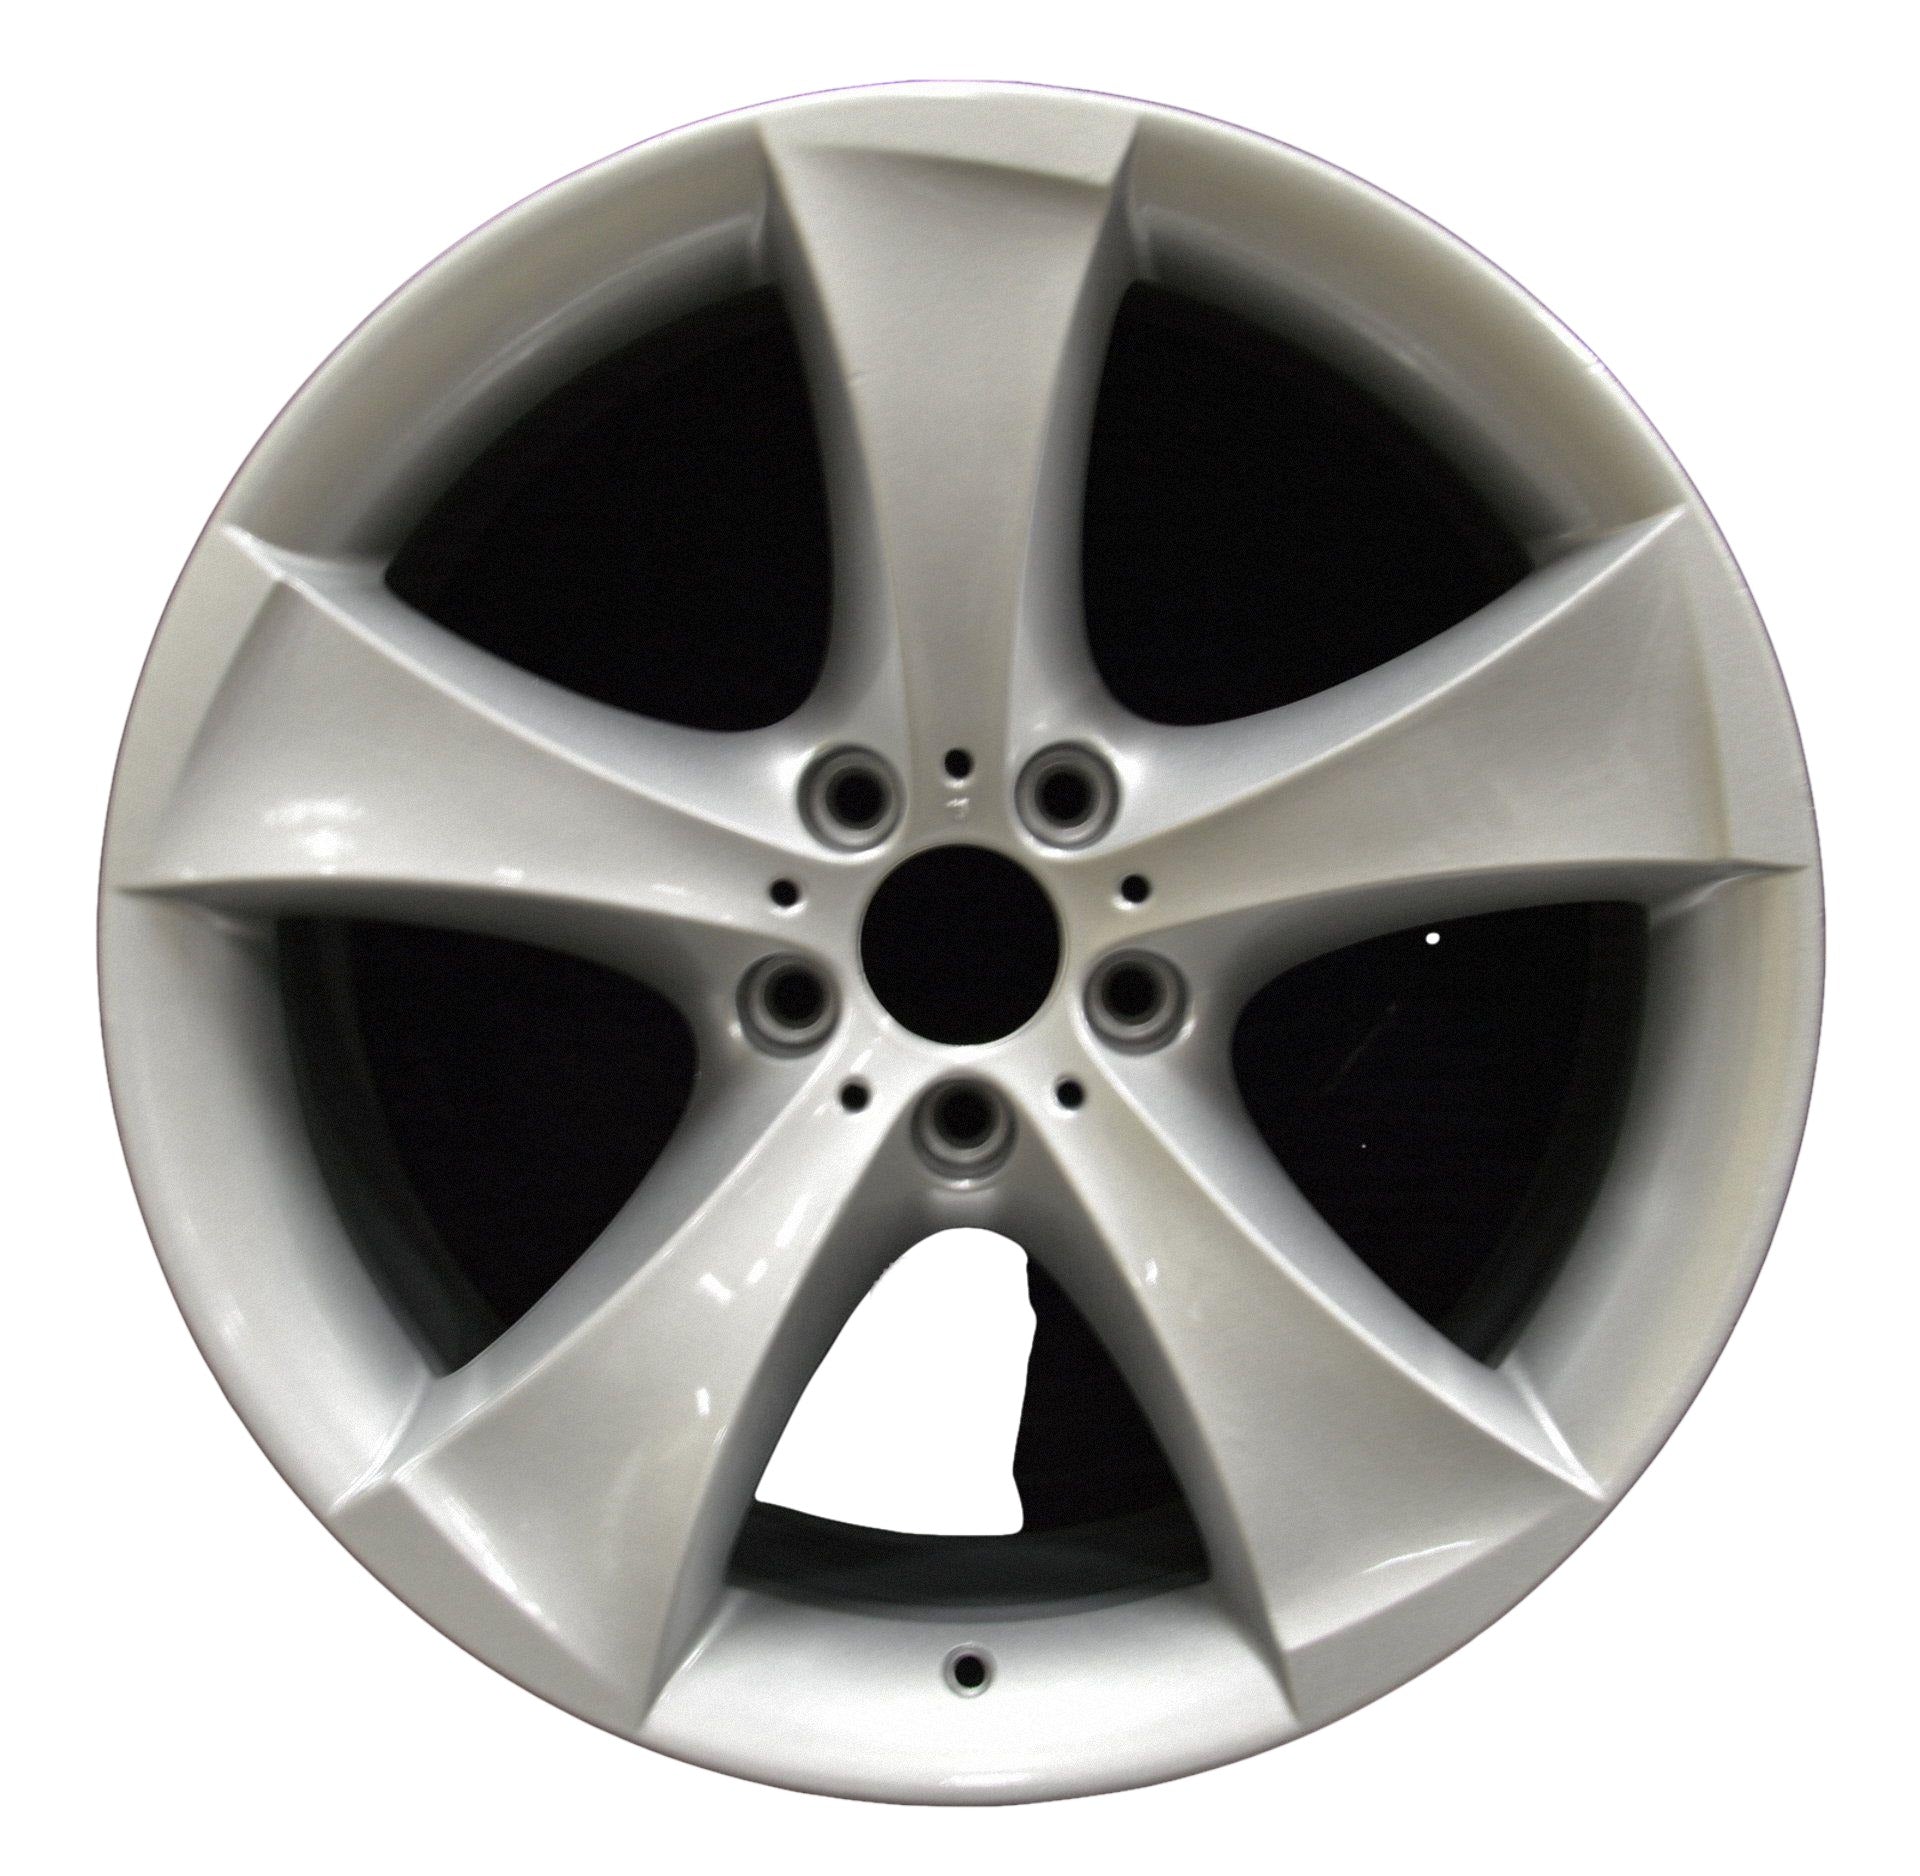 BMW X6  2008, 2009, 2010, 2011, 2012, 2013, 2014 Factory OEM Car Wheel Size 20x10 Alloy WAO.71290FT.PS02.FF